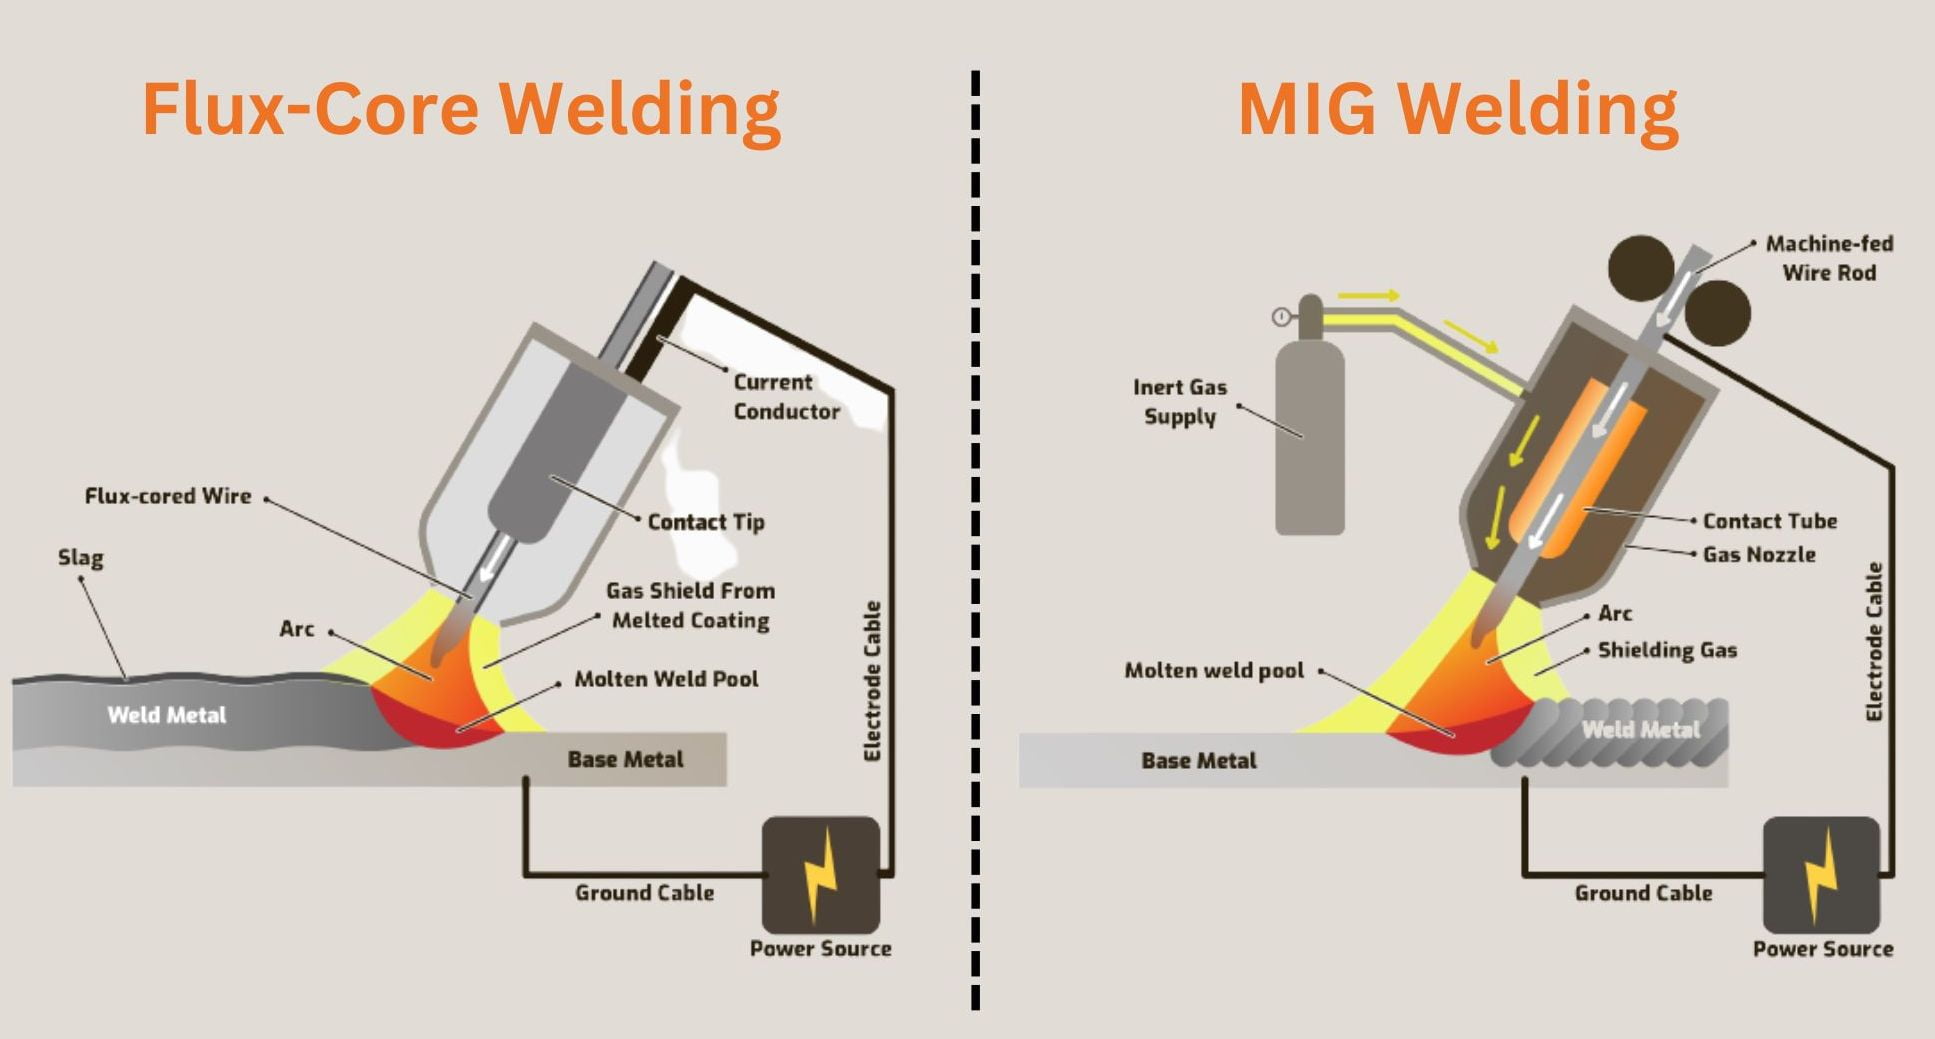 differences between two welding processes